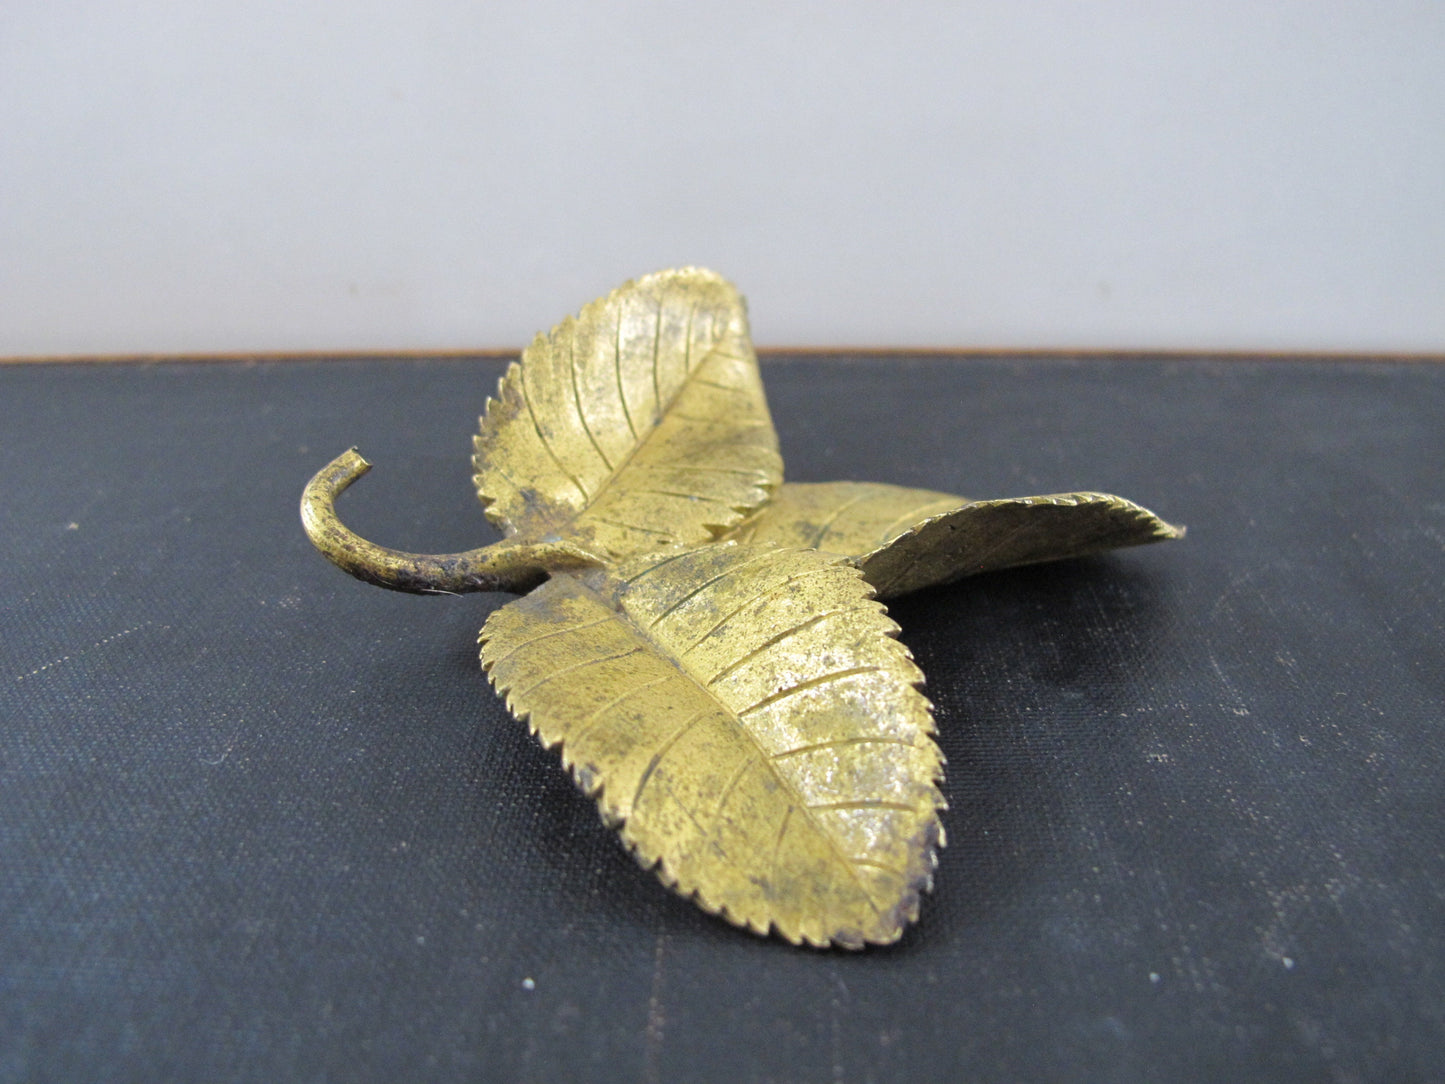 Sculpture Gilt Bronze Three Leaves Roses Victorian Finely Detailed 1850s 1800s